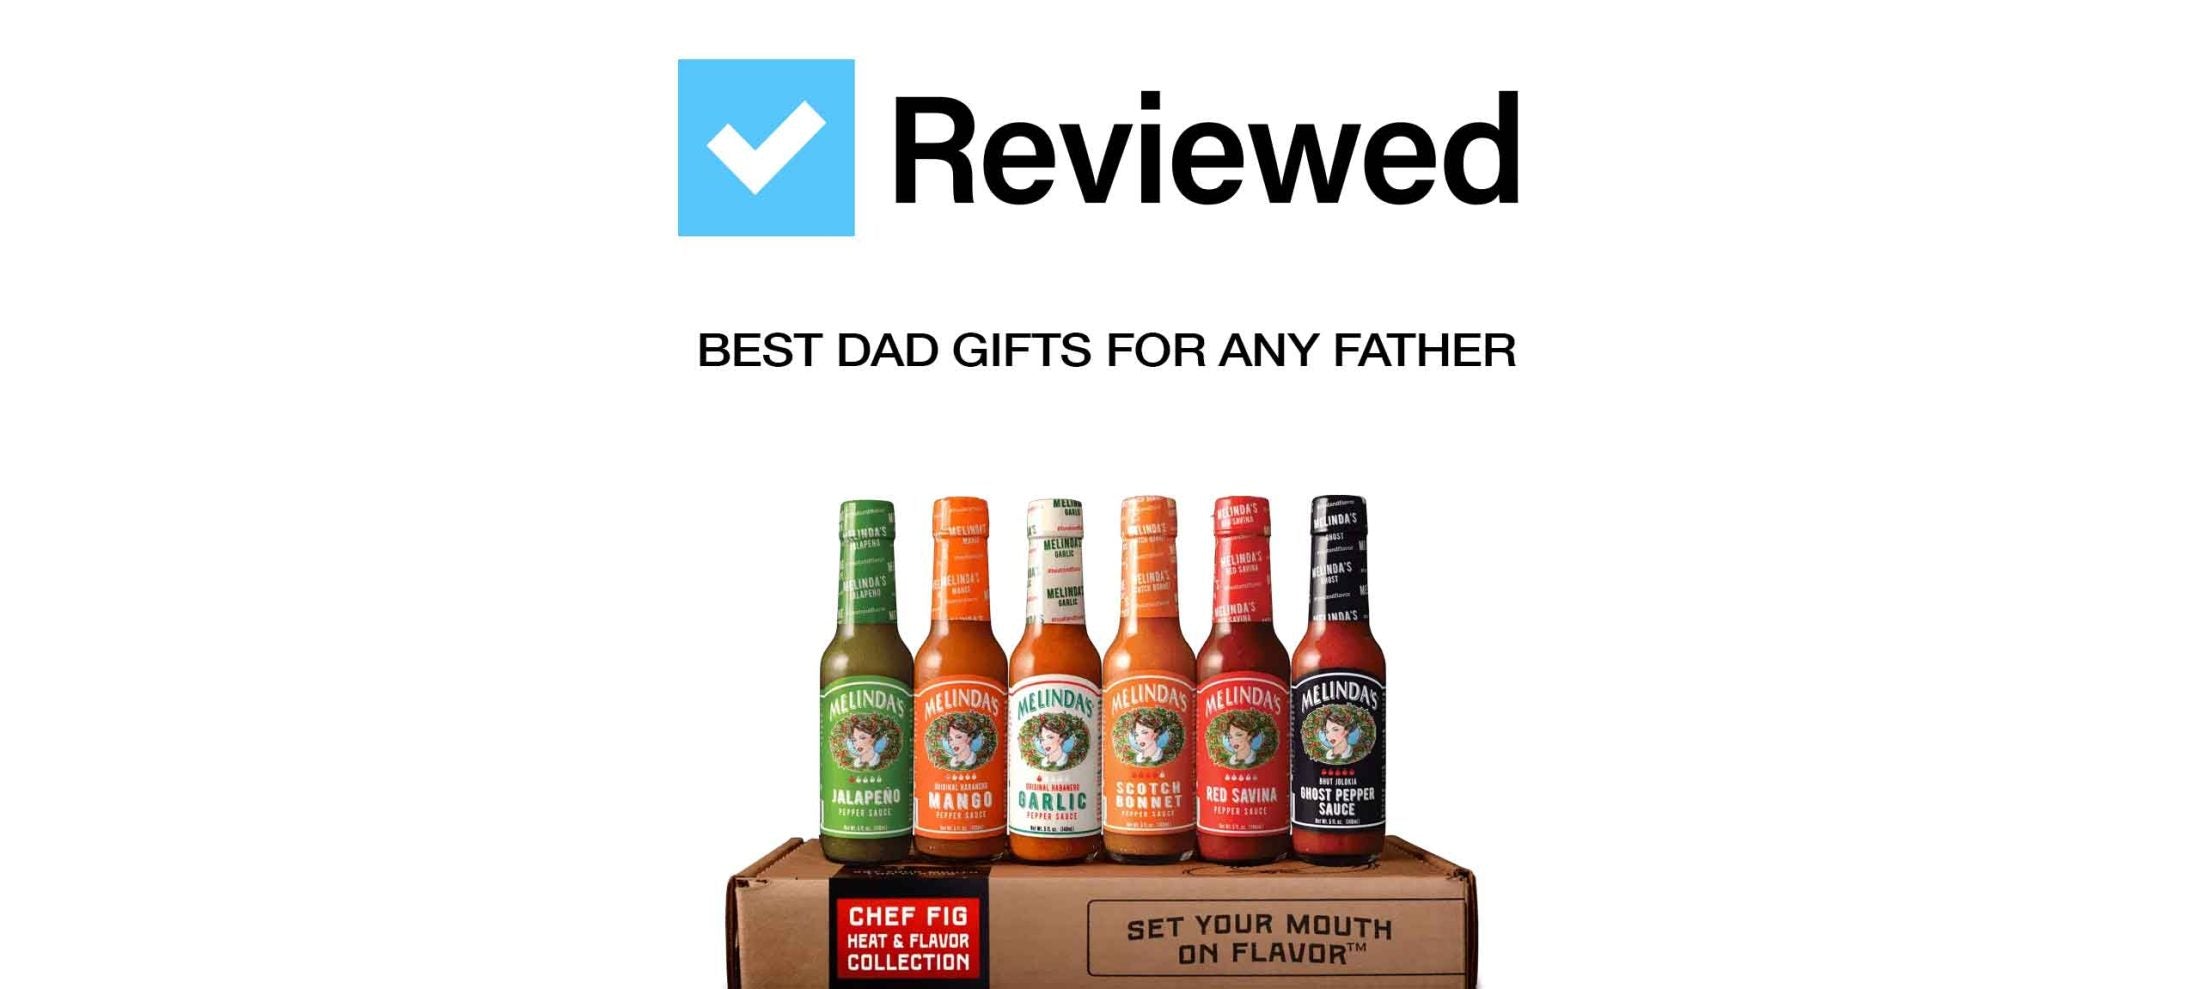 BEST DAD GIFTS FOR ANY FATHER | Says reviewed.usatoday.com